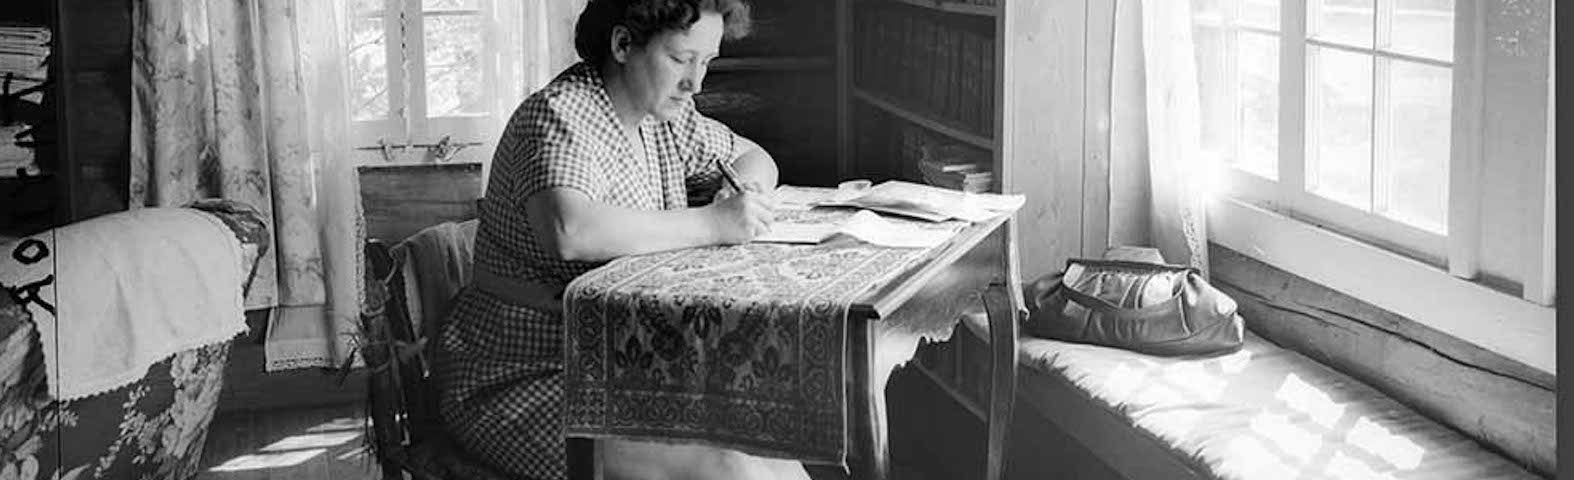 A woman sits writing at a desk